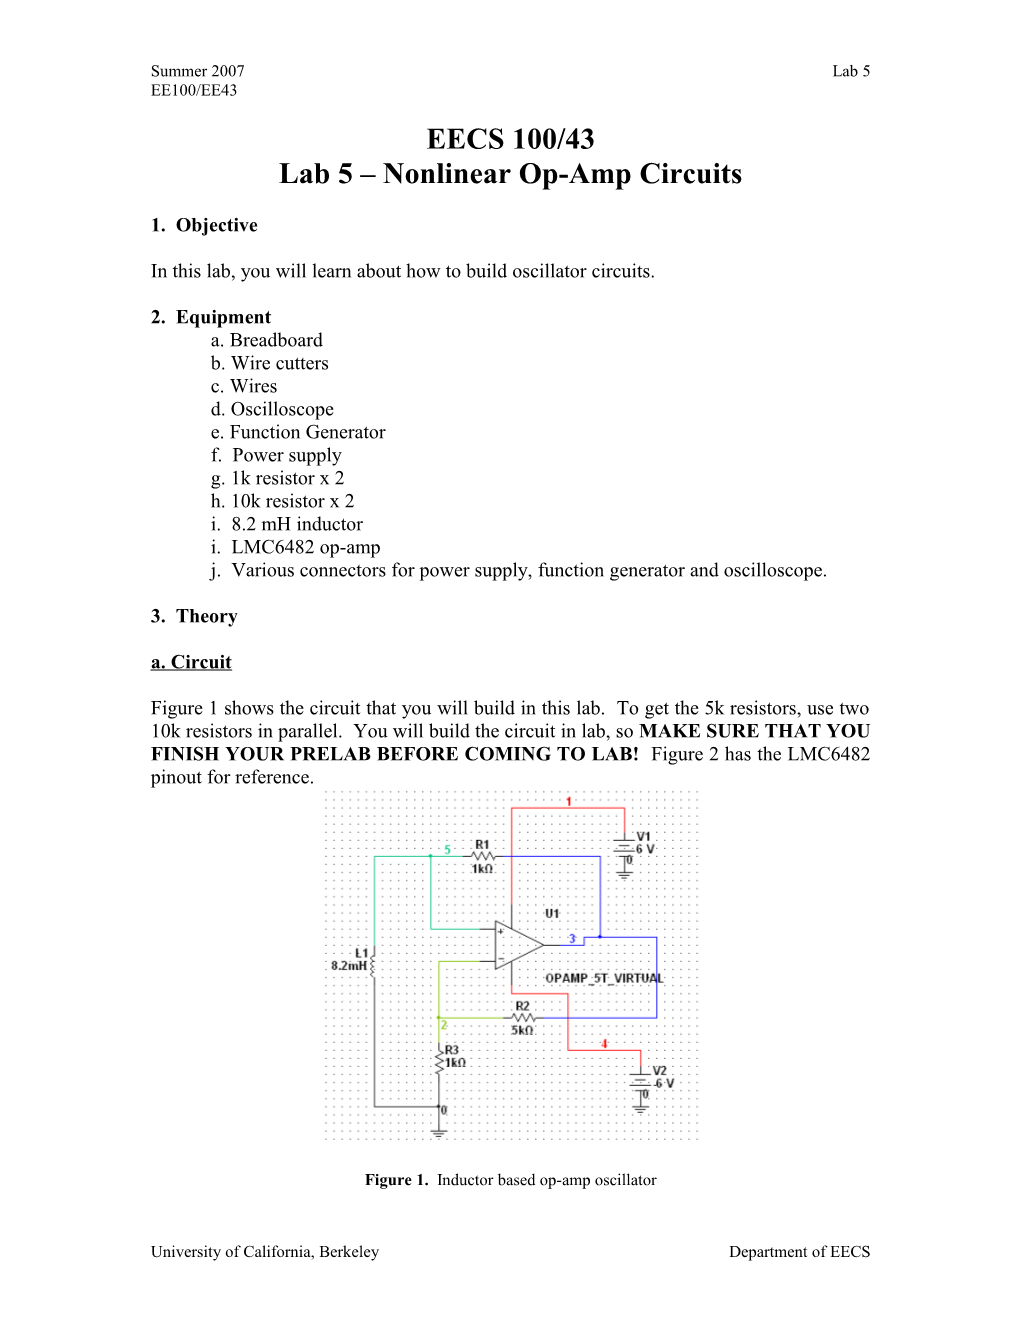 Lab 5 Nonlinear Op-Amp Circuits